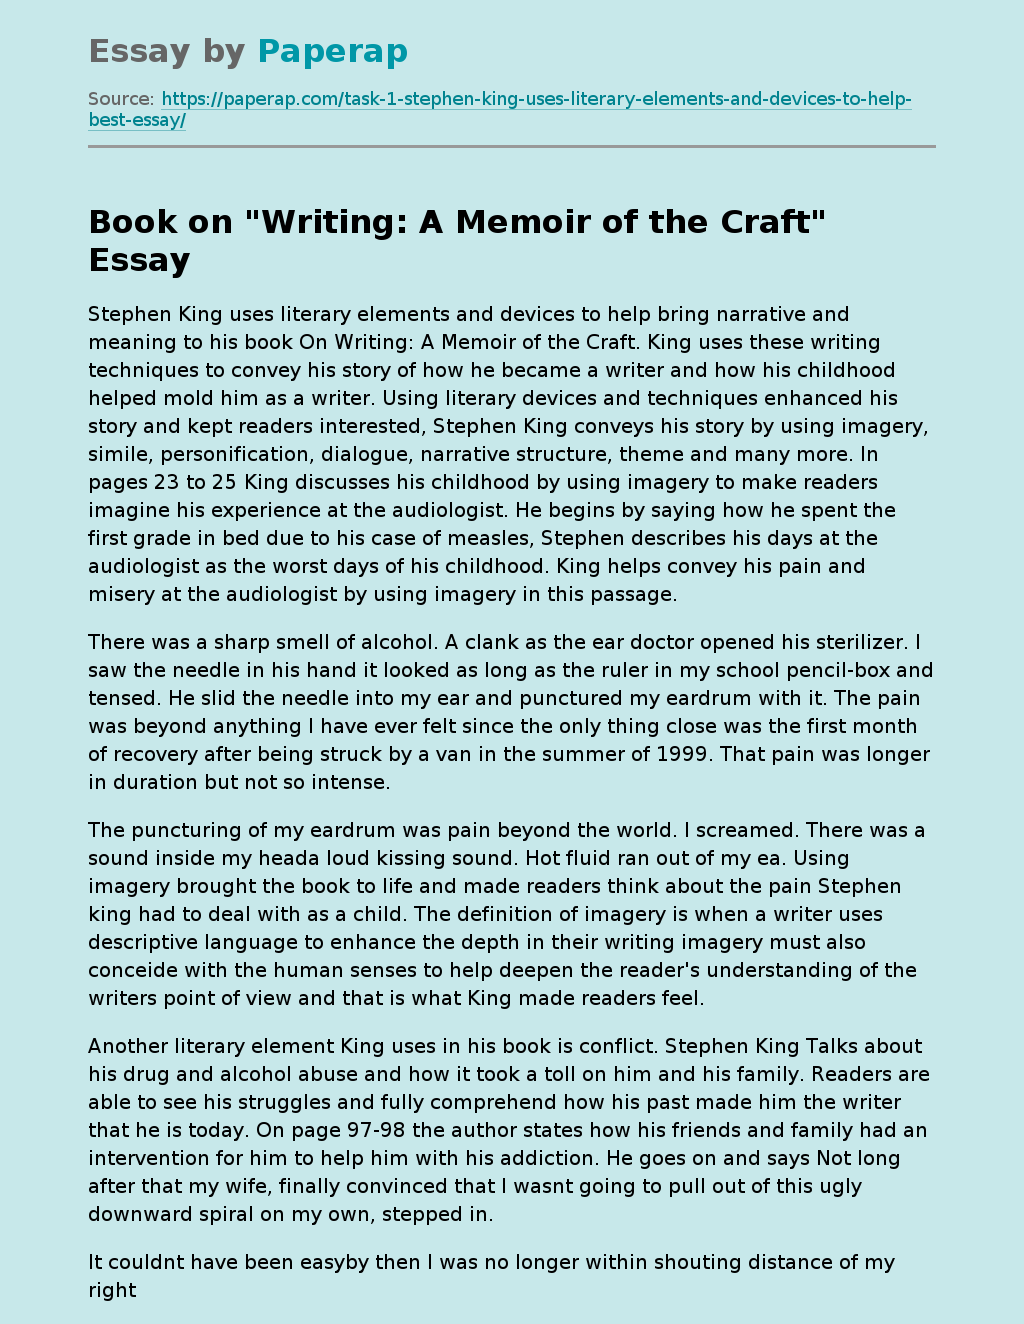 Book on "Writing: A Memoir of the Craft"